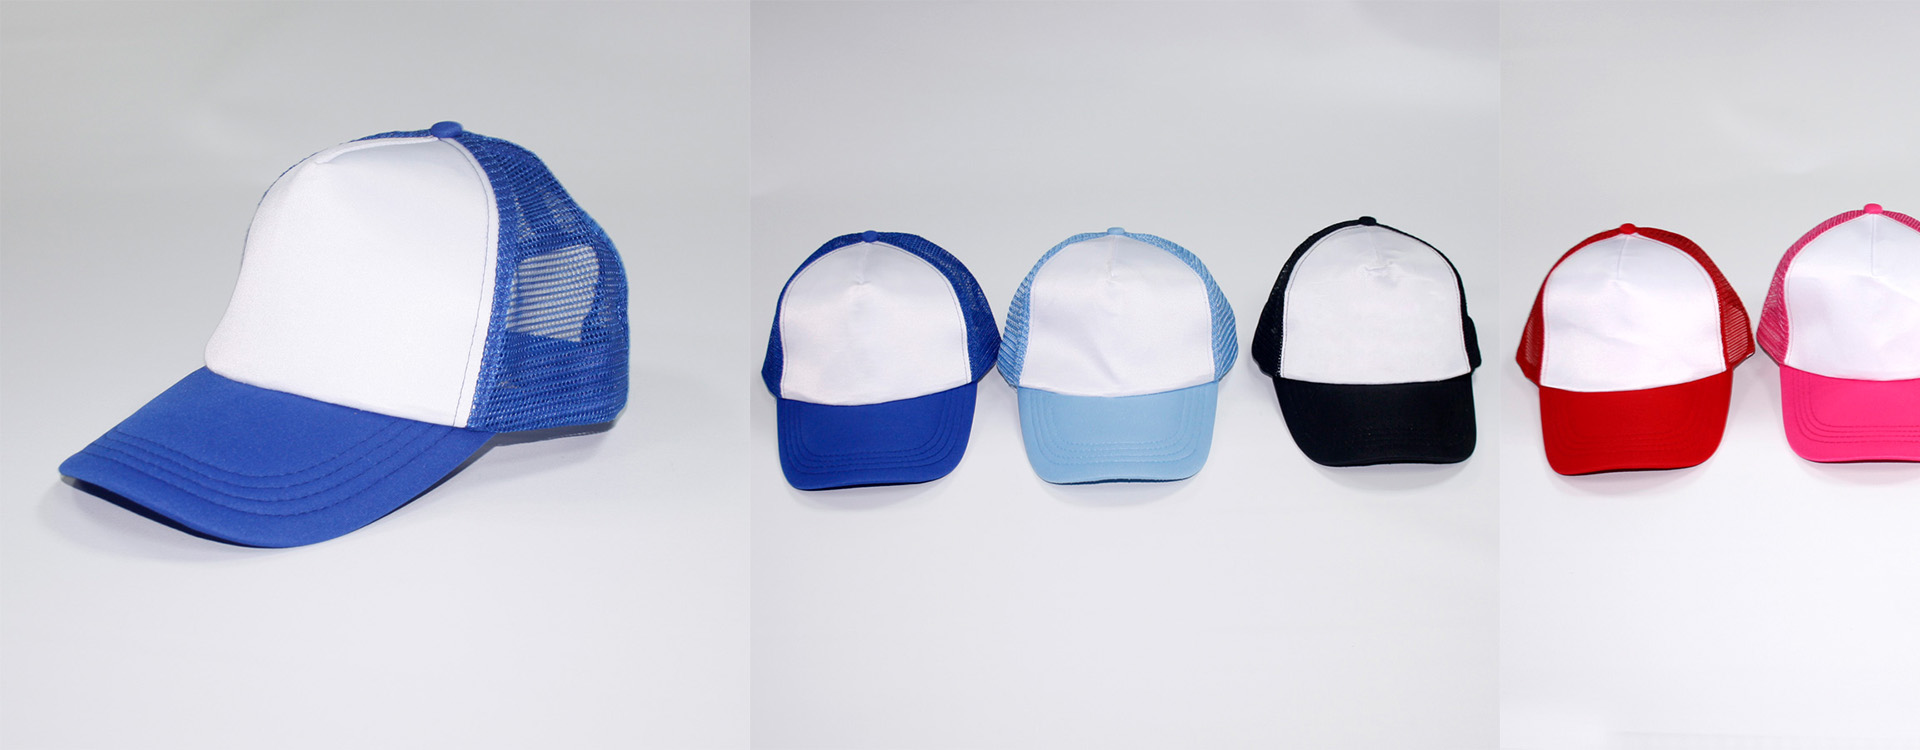 cheap promotional items baseball caps for kids